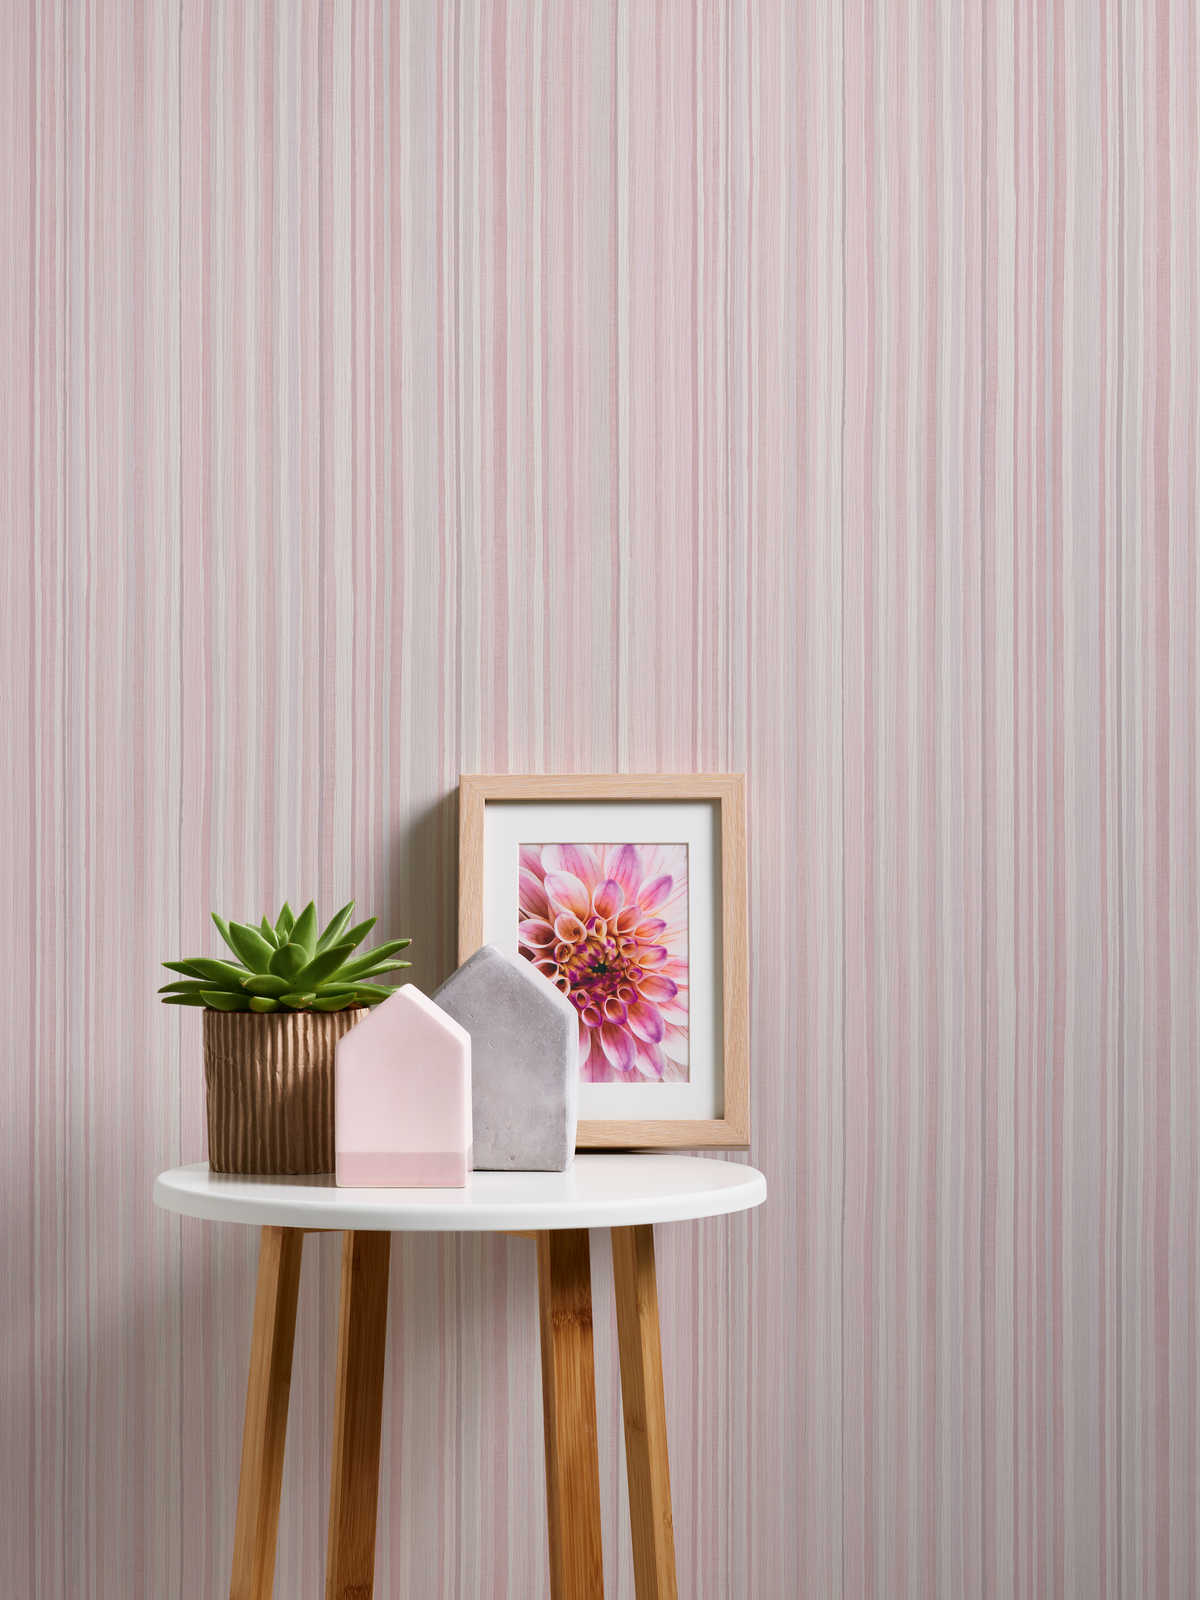             Stripes wallpaper with narrow lines pattern - pink, grey
        